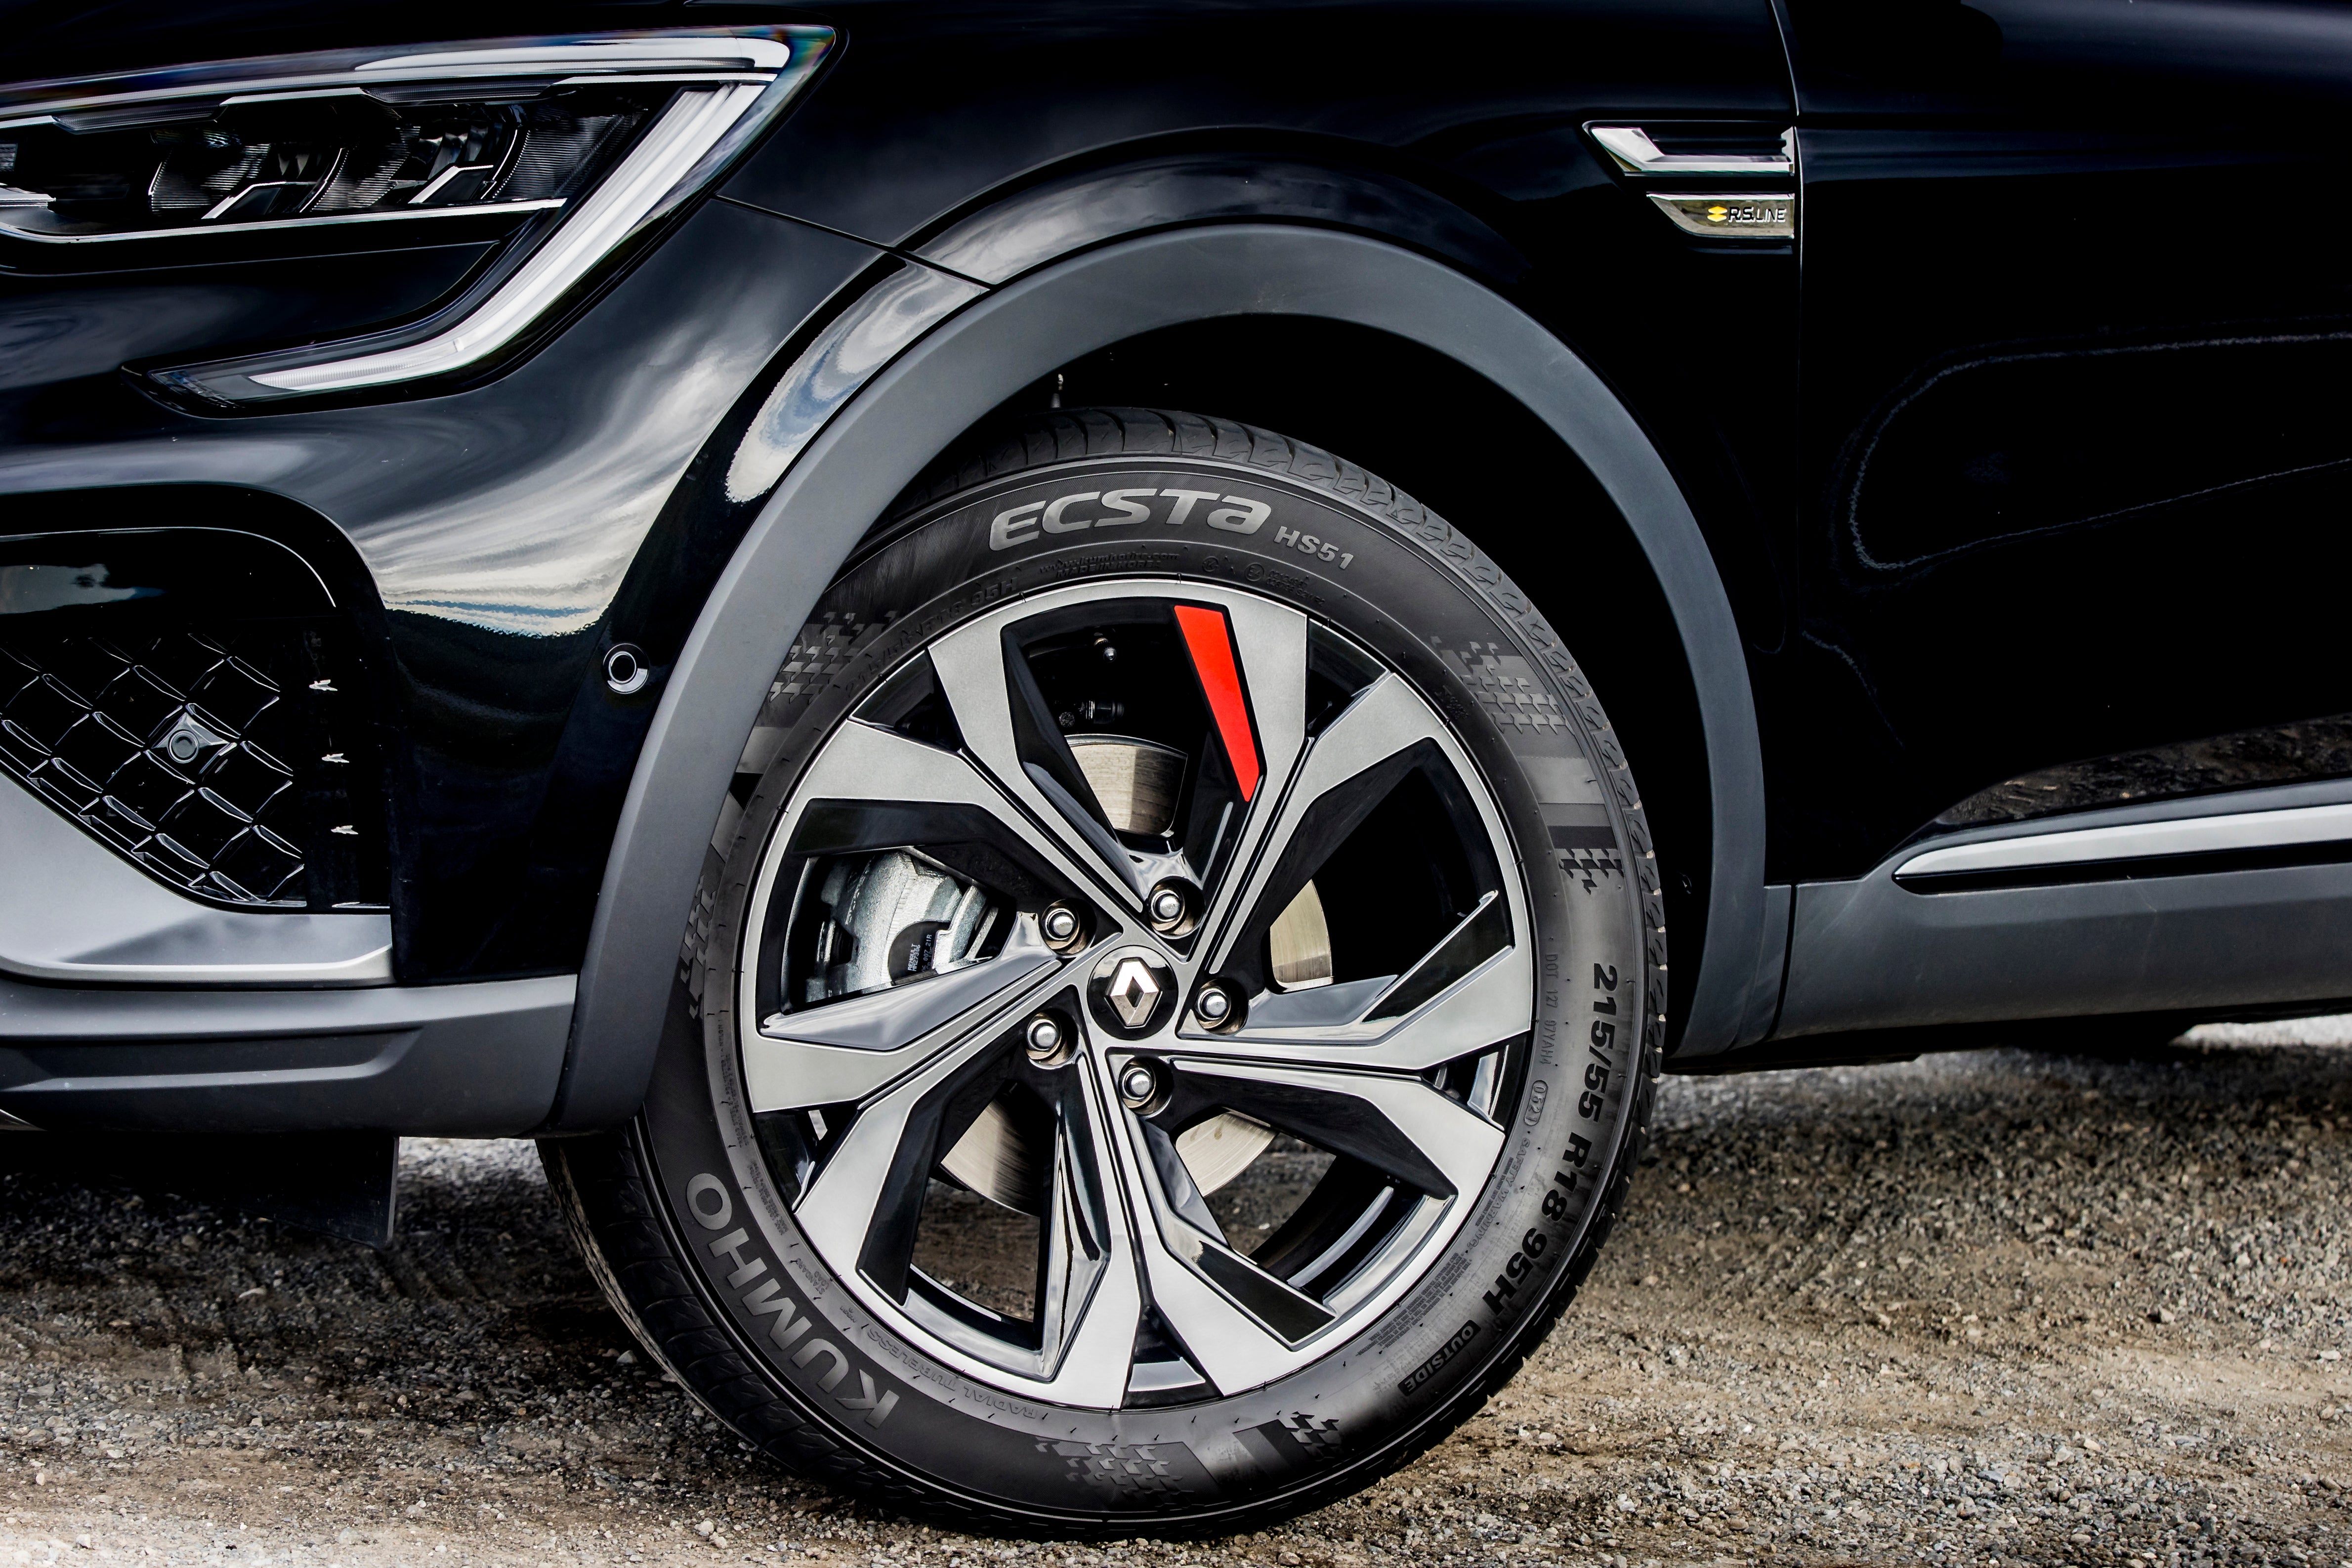 Renault’s new SUV comes as front-wheel drive only